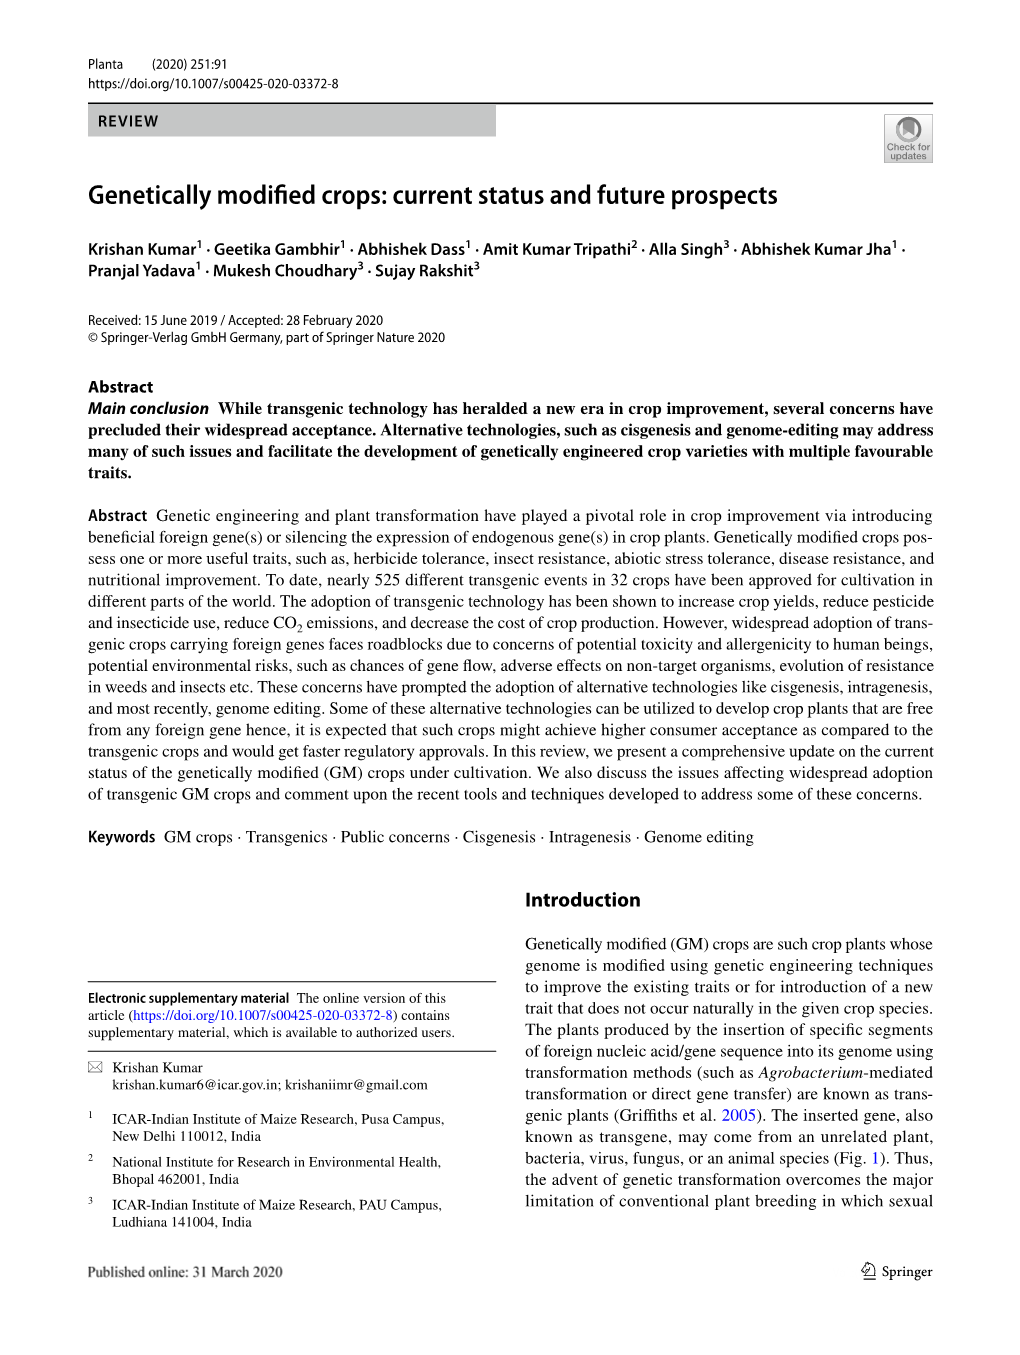 Genetically Modified Crops: Current Status and Future Prospects